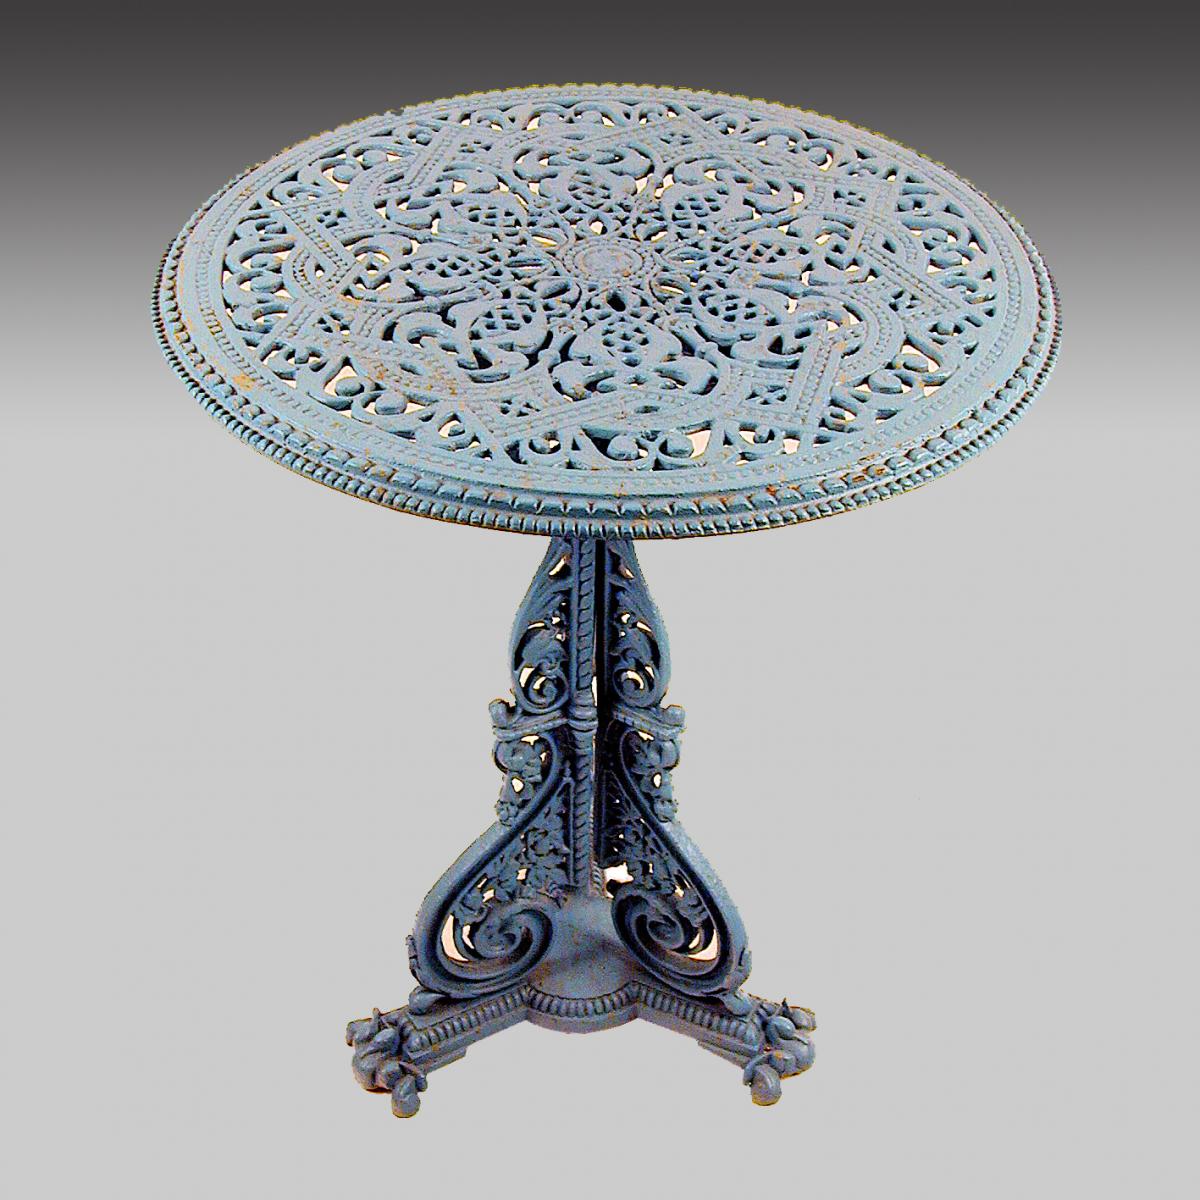 Aesthetic Movement cast iron table after a design by Christopher Dresser